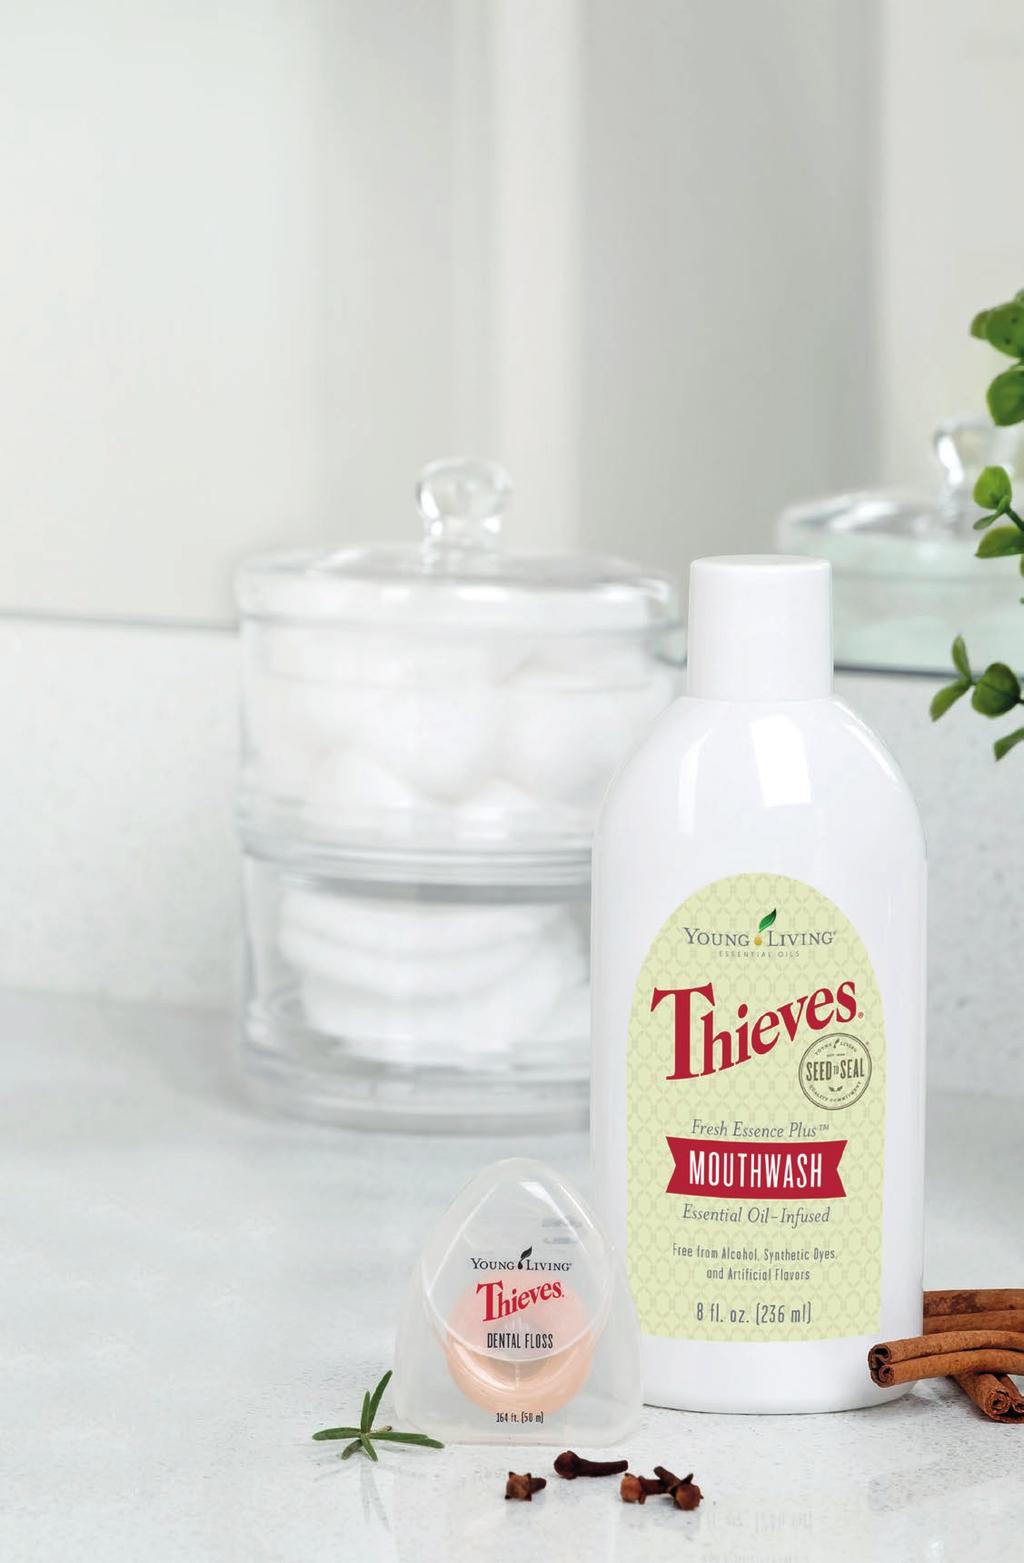 THIEVES DENTAL CARE PRODUCTS ARE SURE TO MAKE YOU SMILE Our Thieves oral care products use essential oils and naturally derived ingredients to give you a fresh-feeling, clean smile.